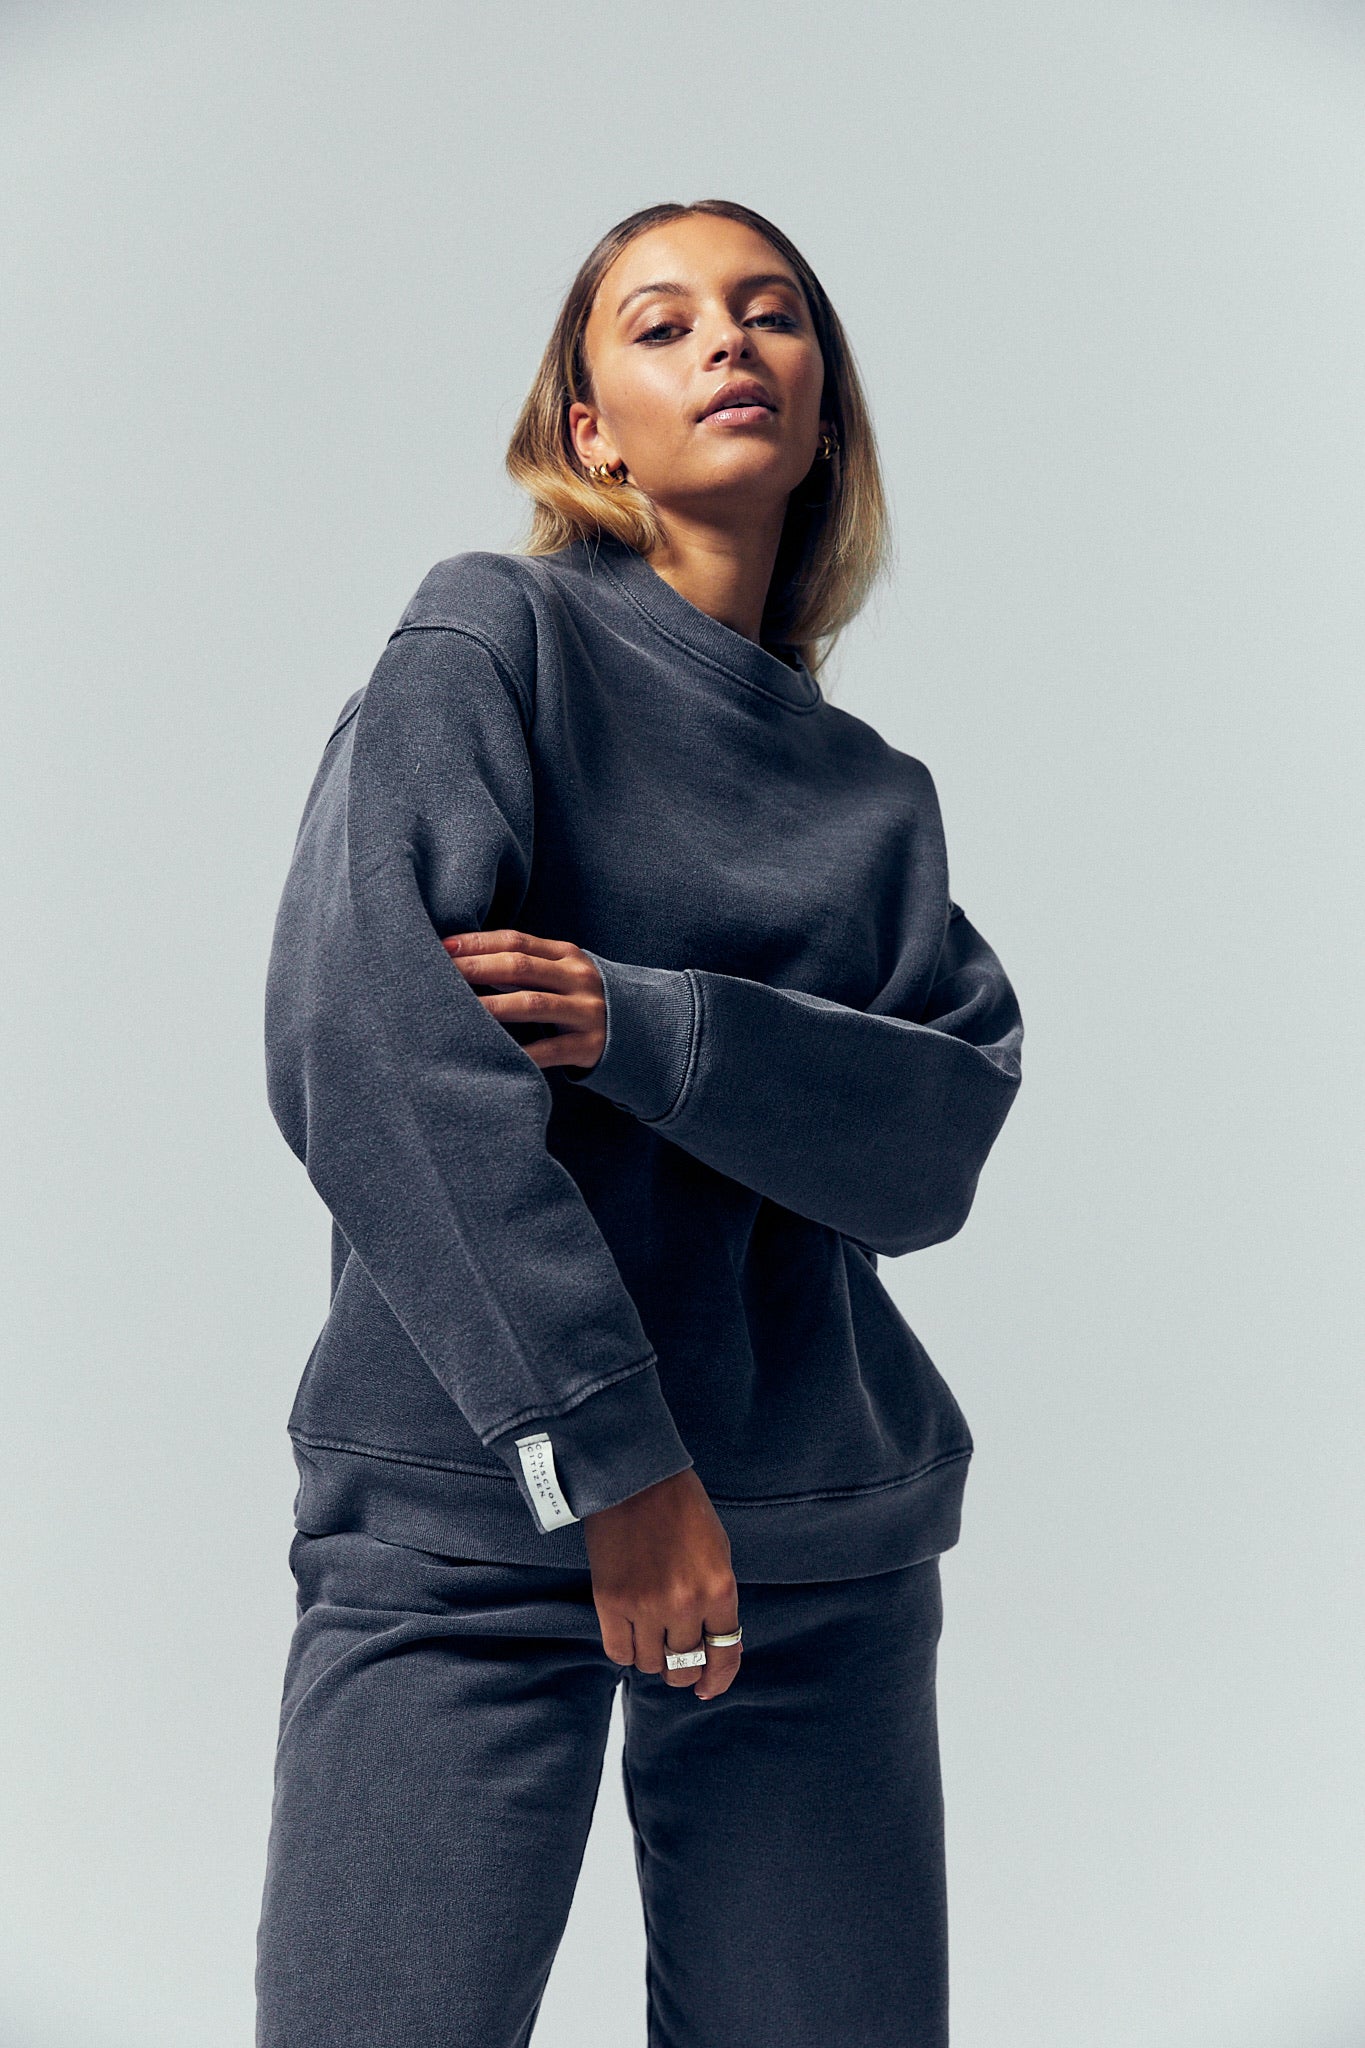  Unwind in style with a sustainable sweatshirt made from recycled materials and organic cotton